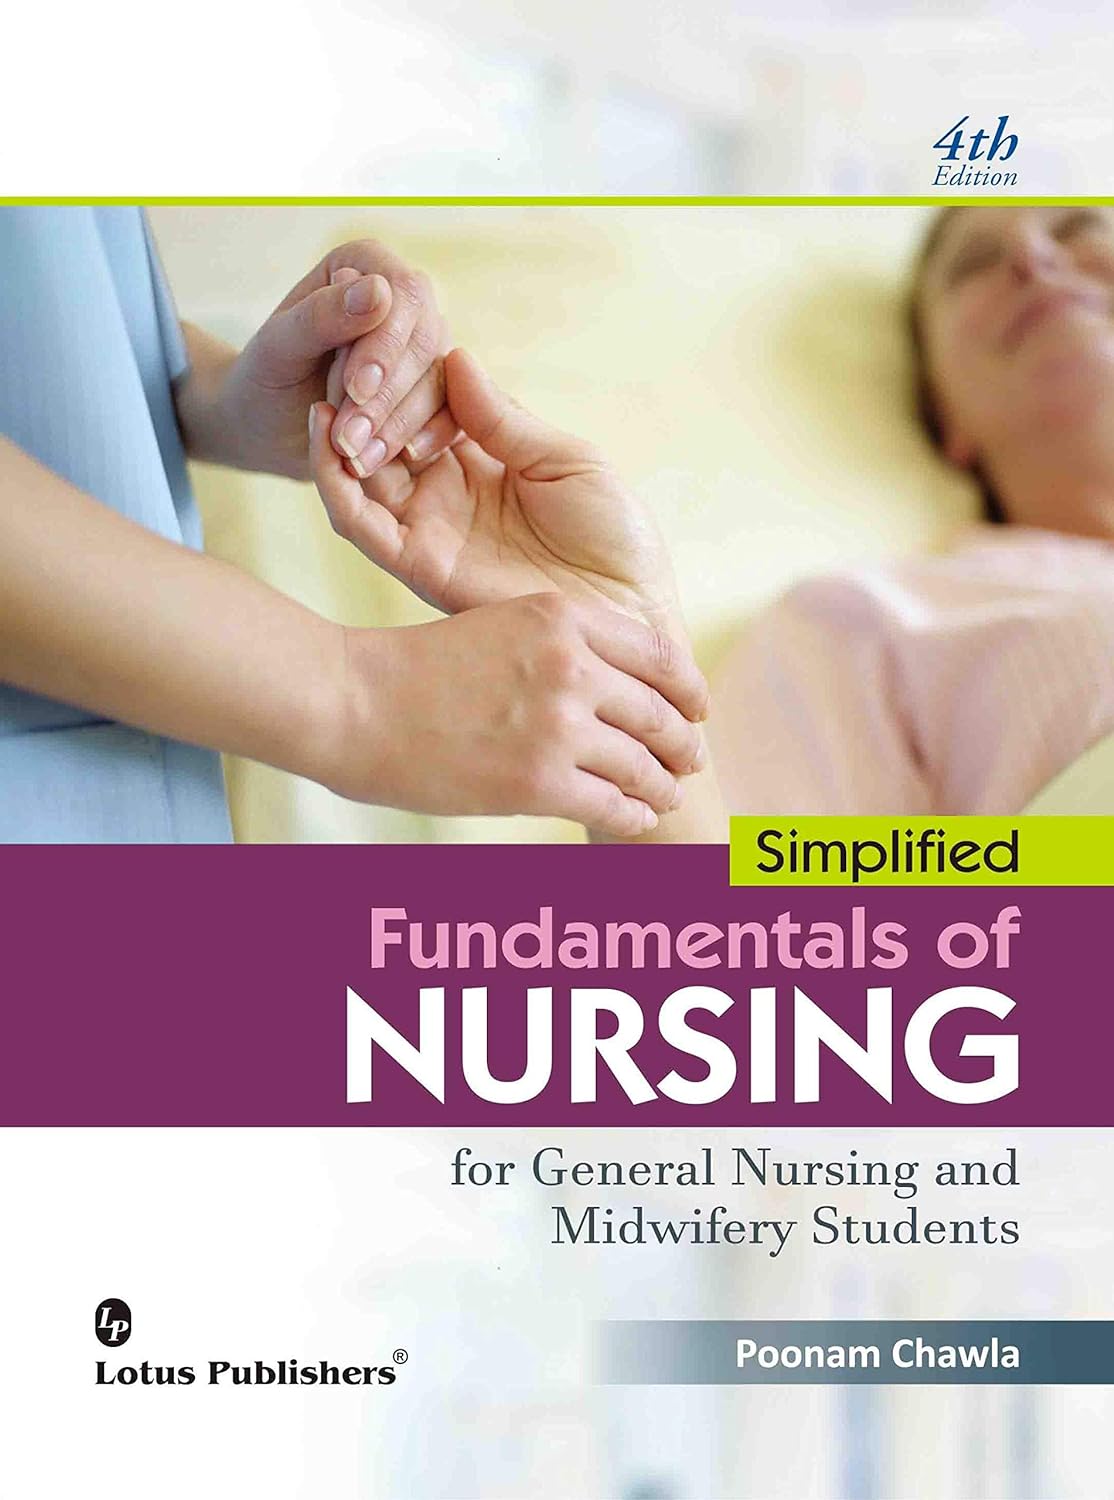 Simplified Fundamentals Of Nursing For GNM Students by Poonam Chawla  4th Edition